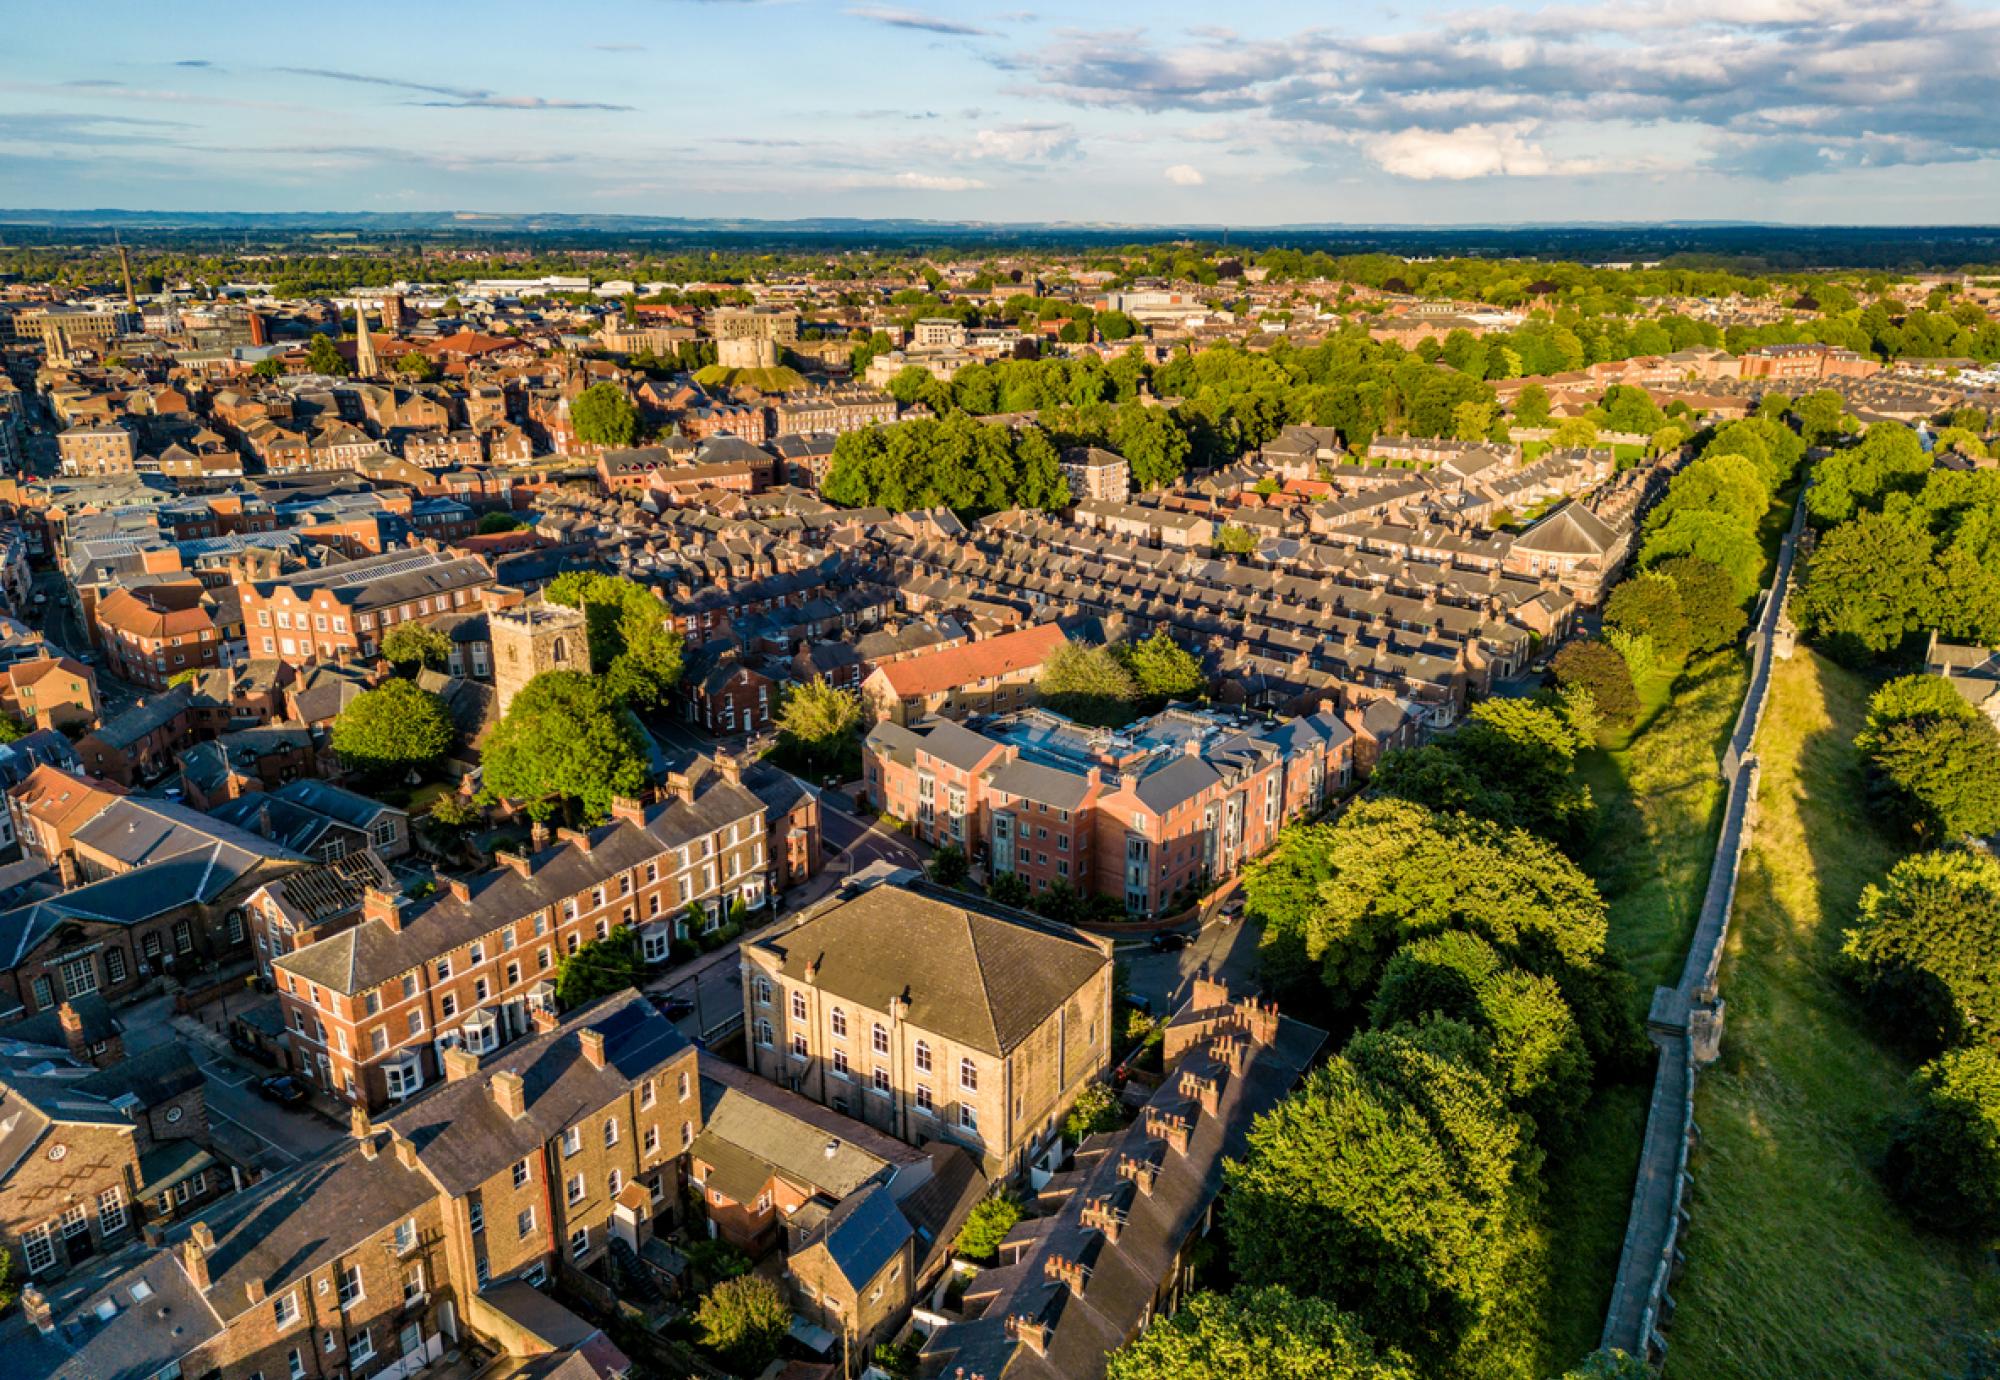 Residential area of York, North Yorkshire